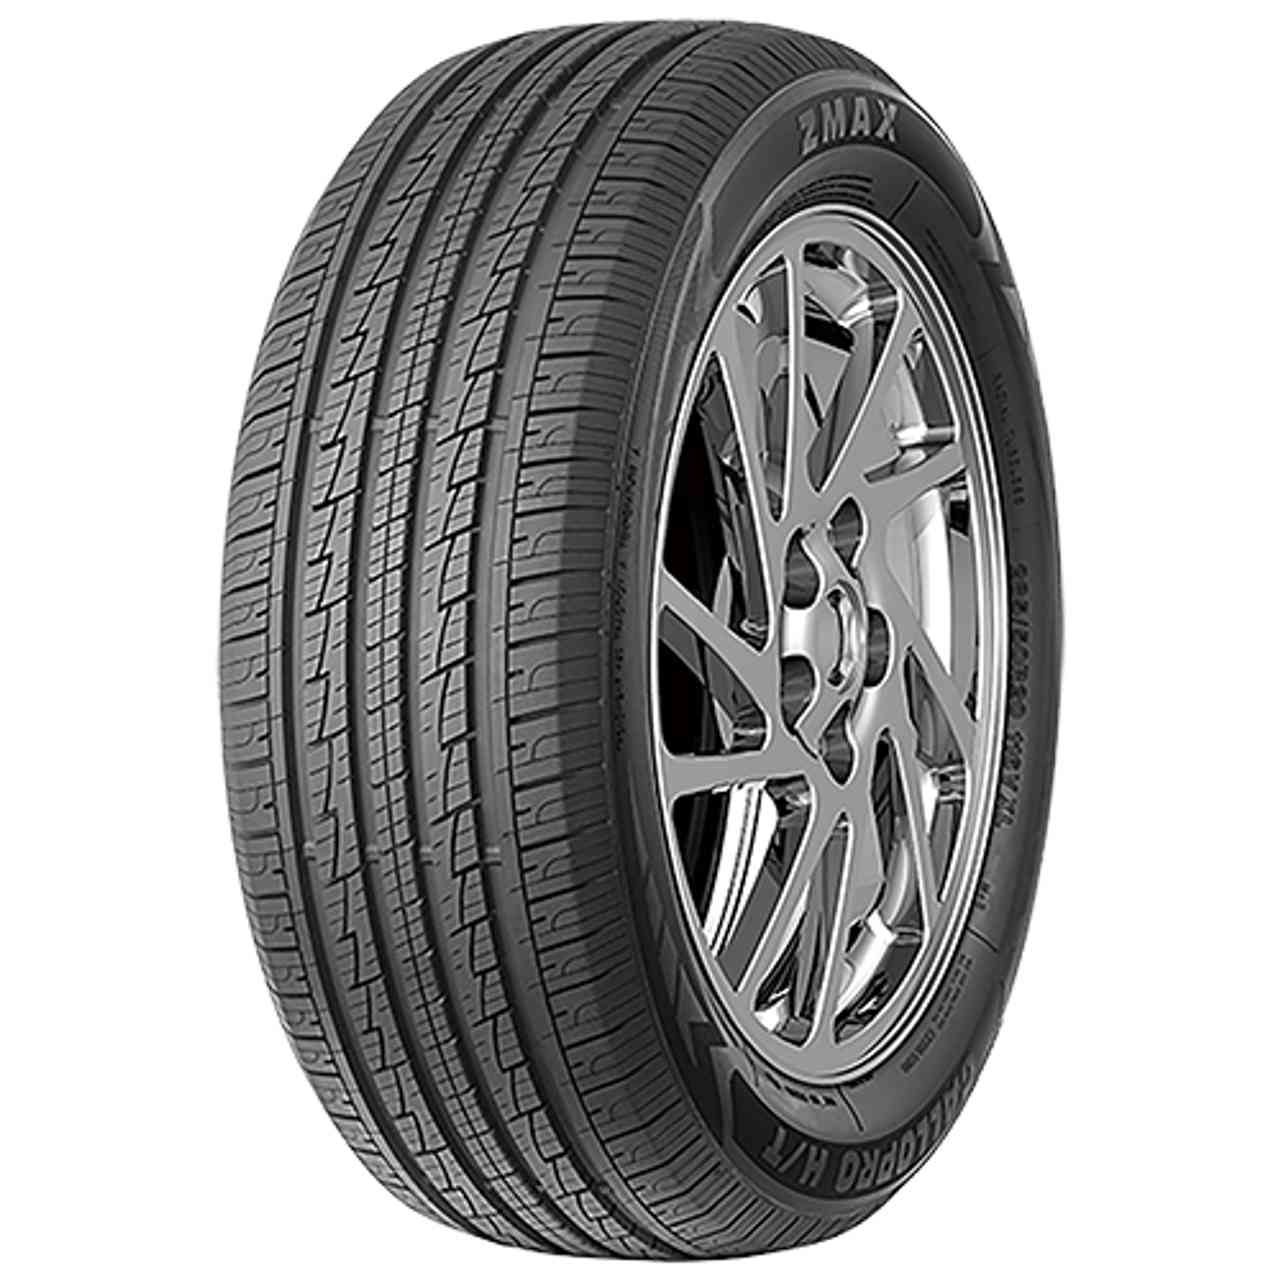 ZMAX GALLOPRO H/T 235/70R16 106H BSW